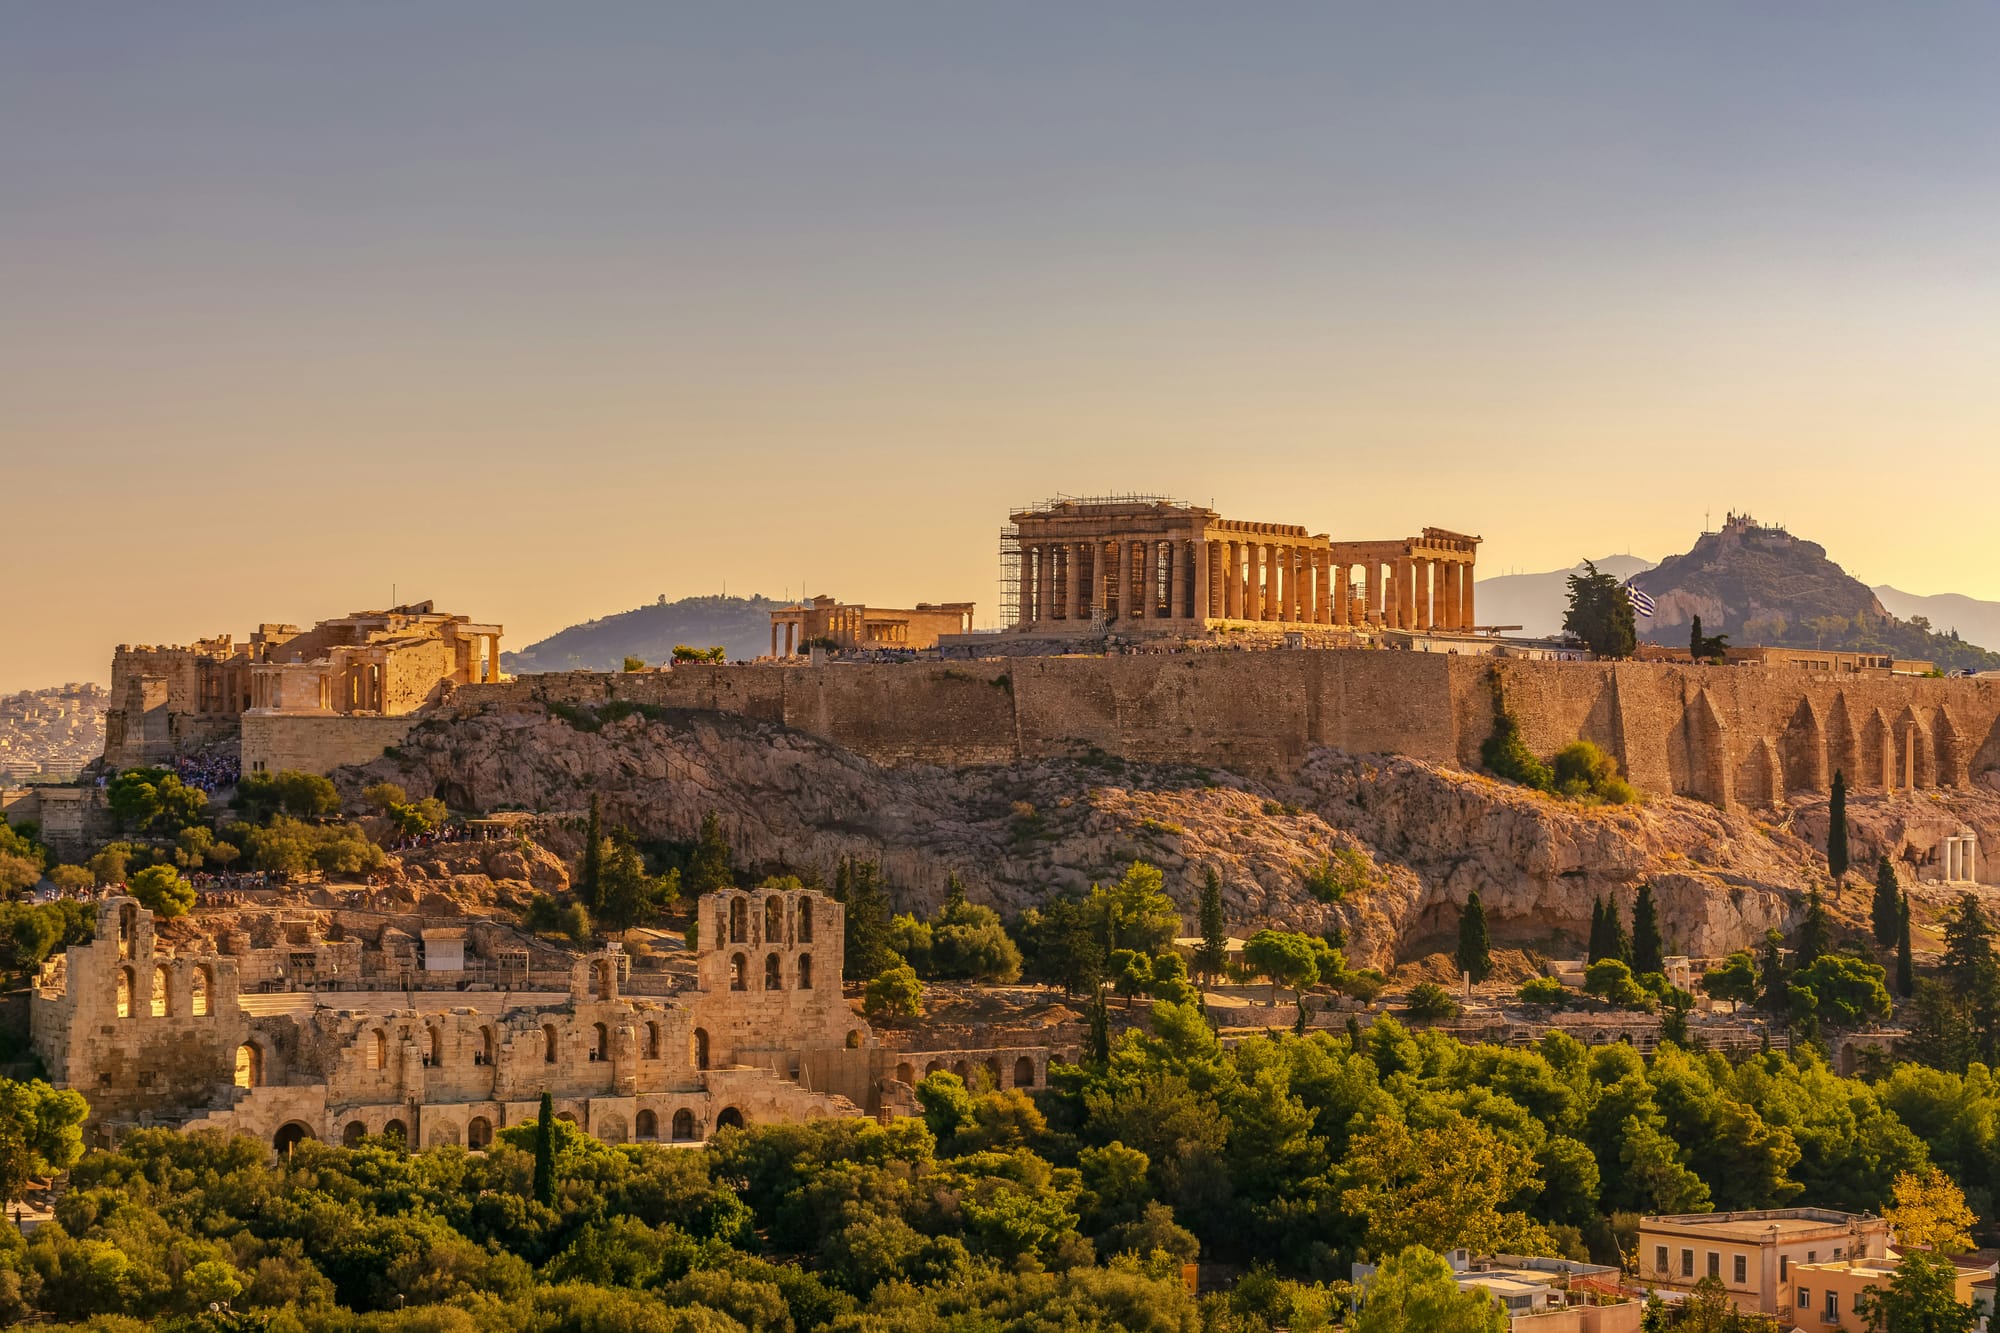 Acropolis of Athens is an accessible attraction in Athens, Greece